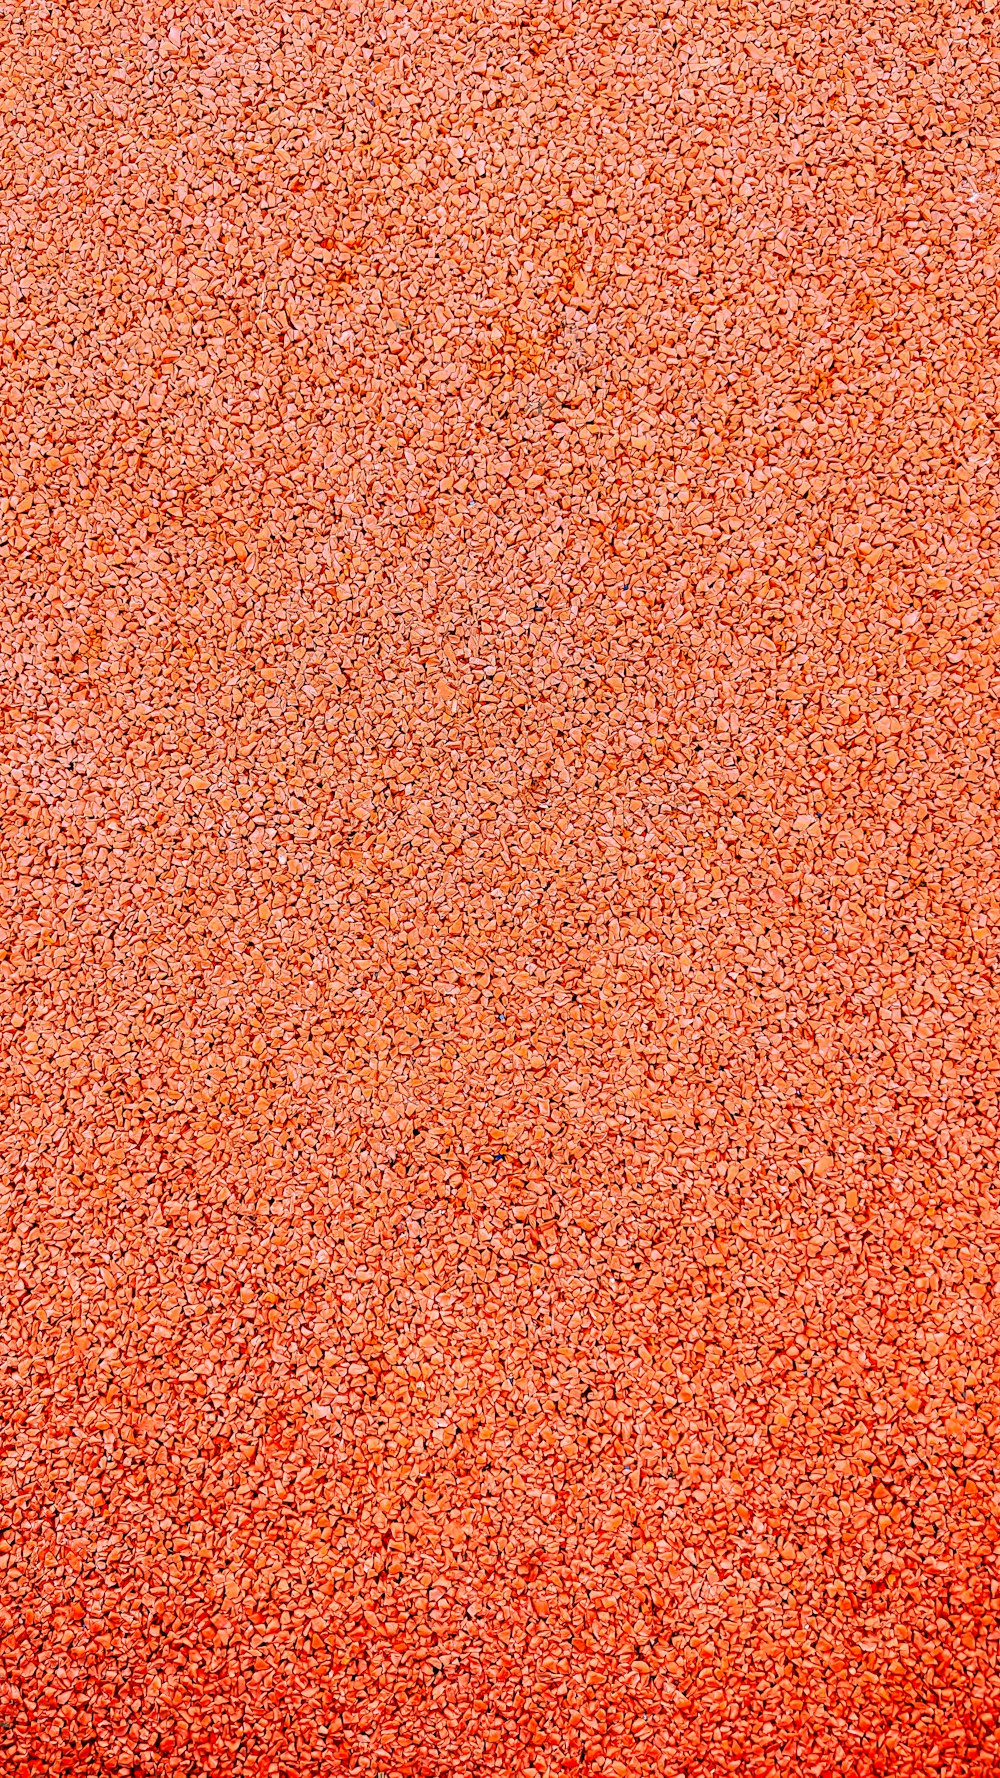 a close up of a red surface with small speckles